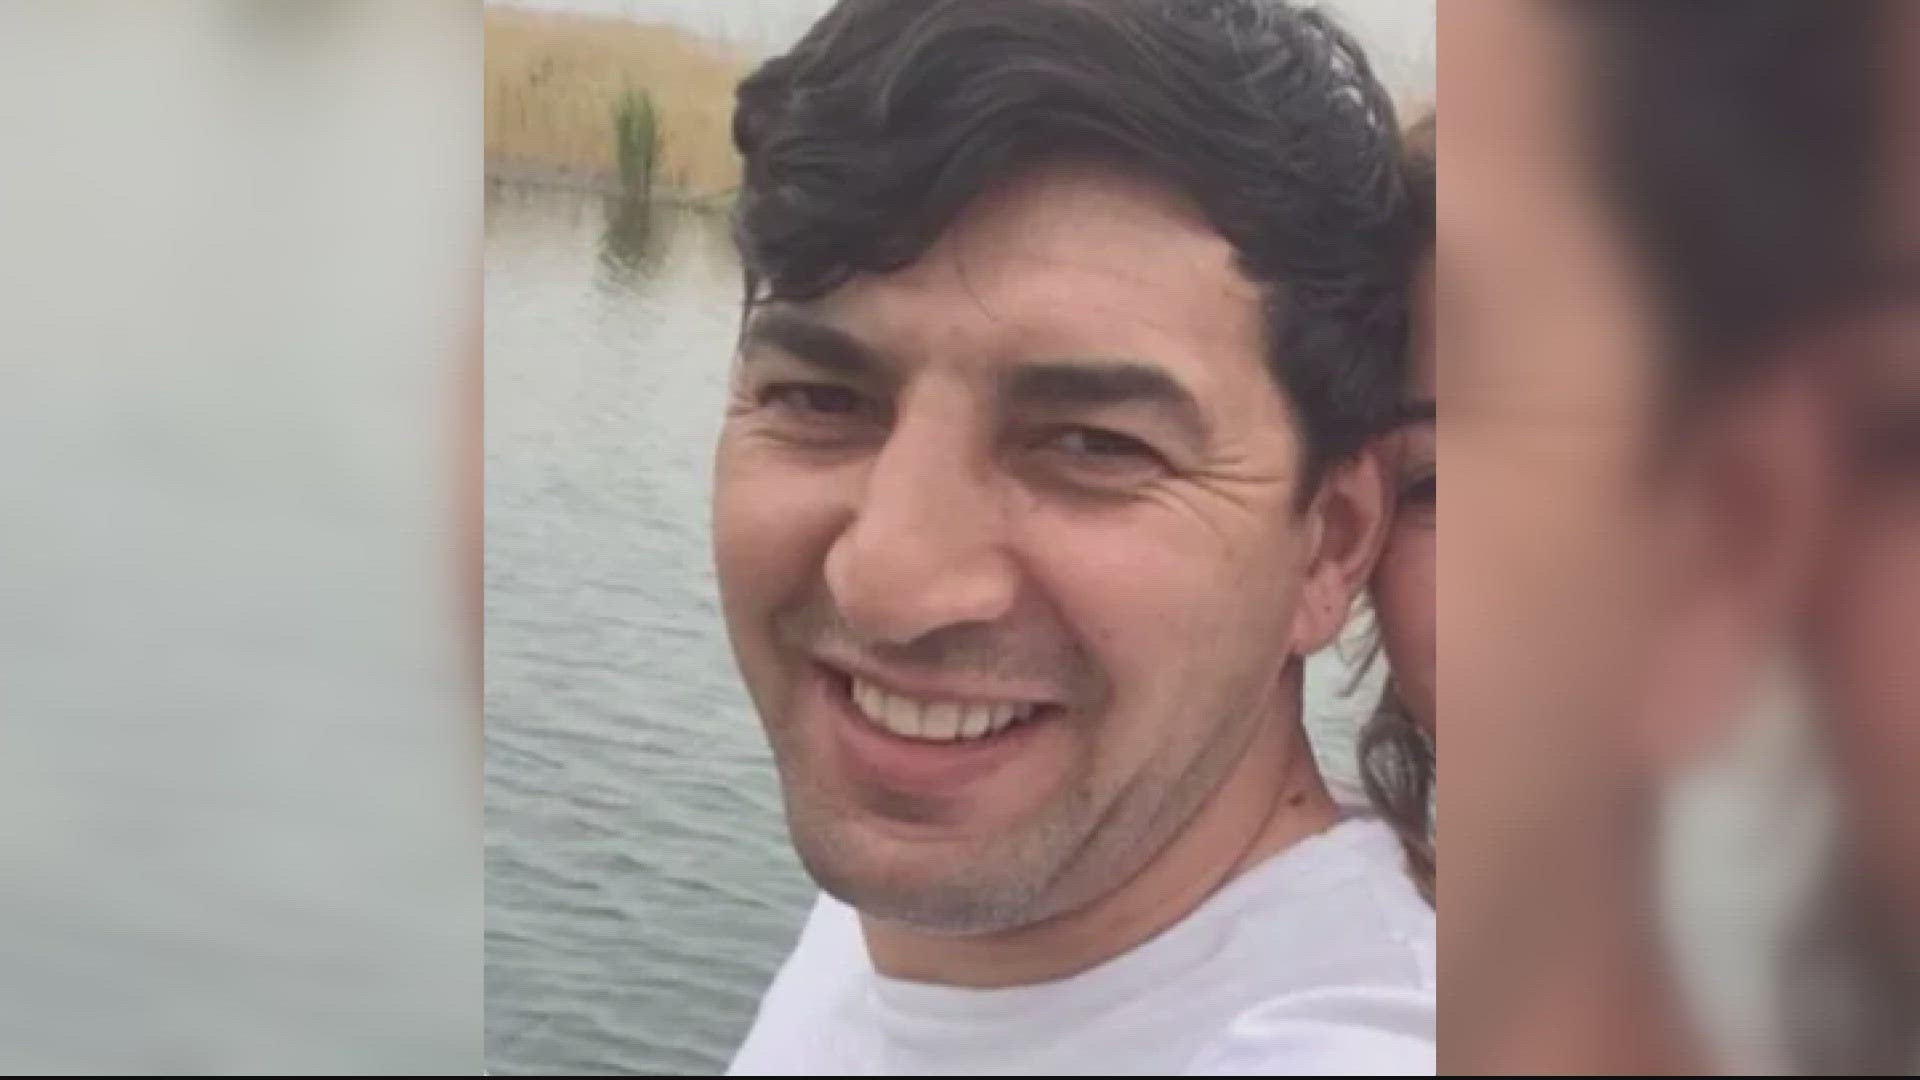 Murat Pacal, 40, leaves behind his wife and two young children, ages 4 and 6.